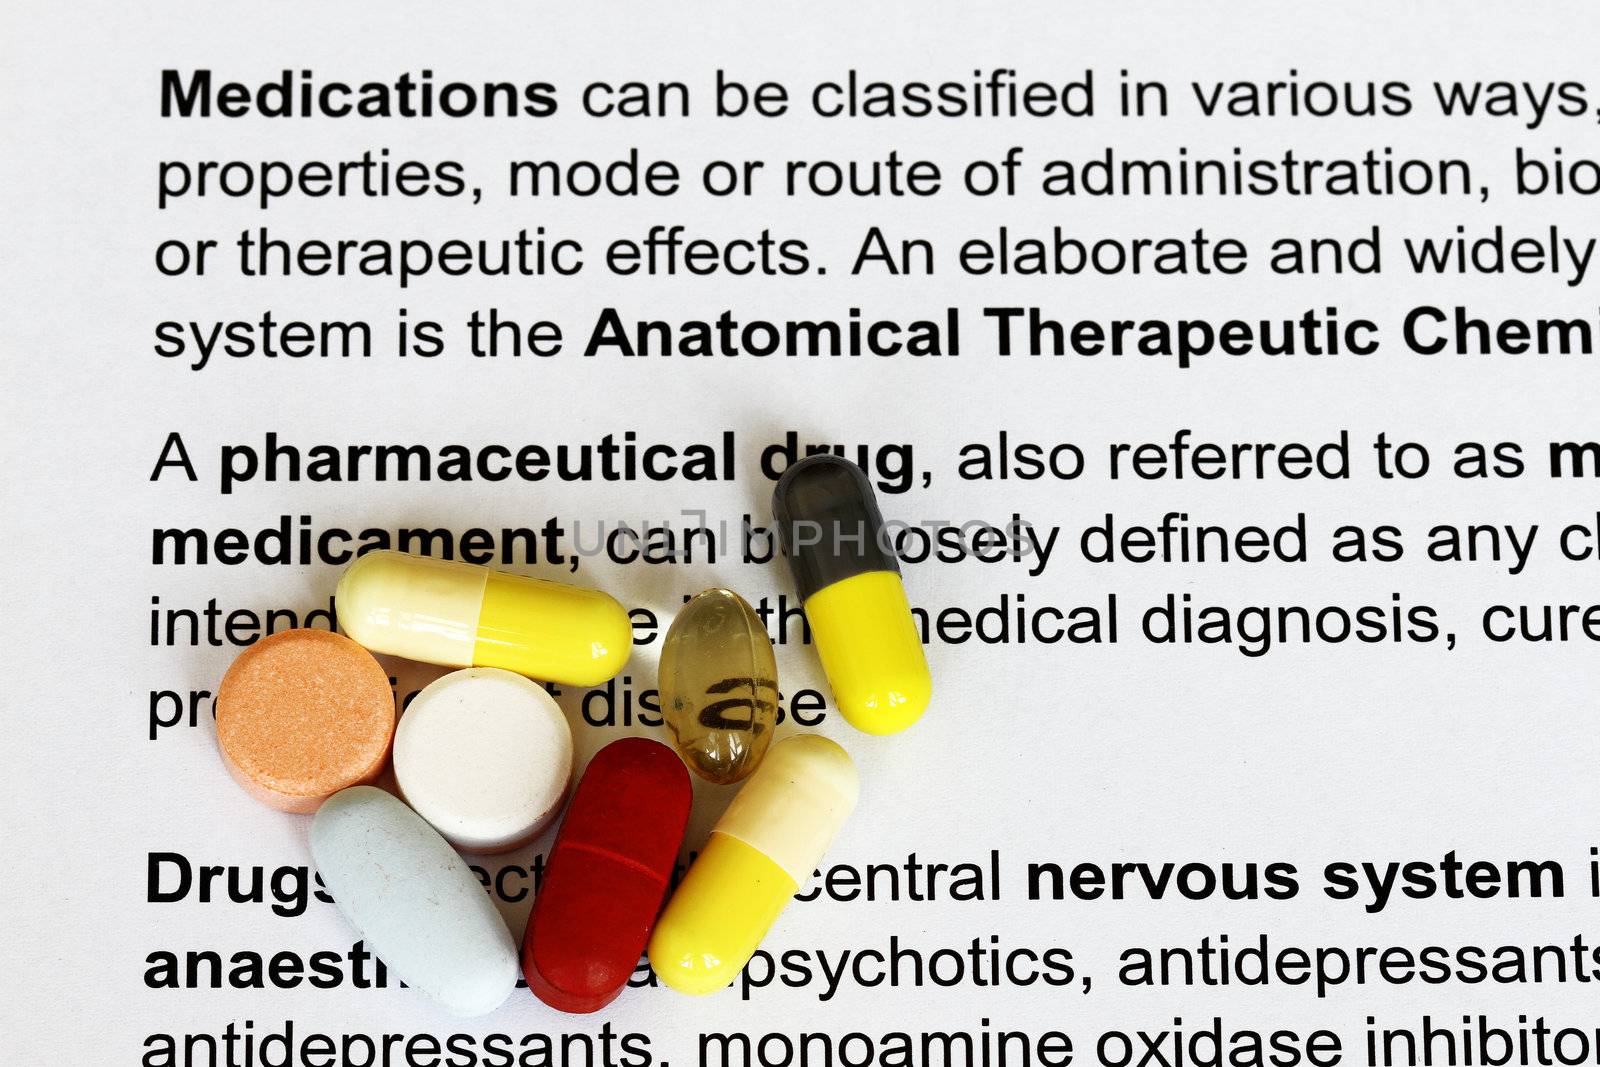 Drugs capsules and pills on a lying on a medical document.